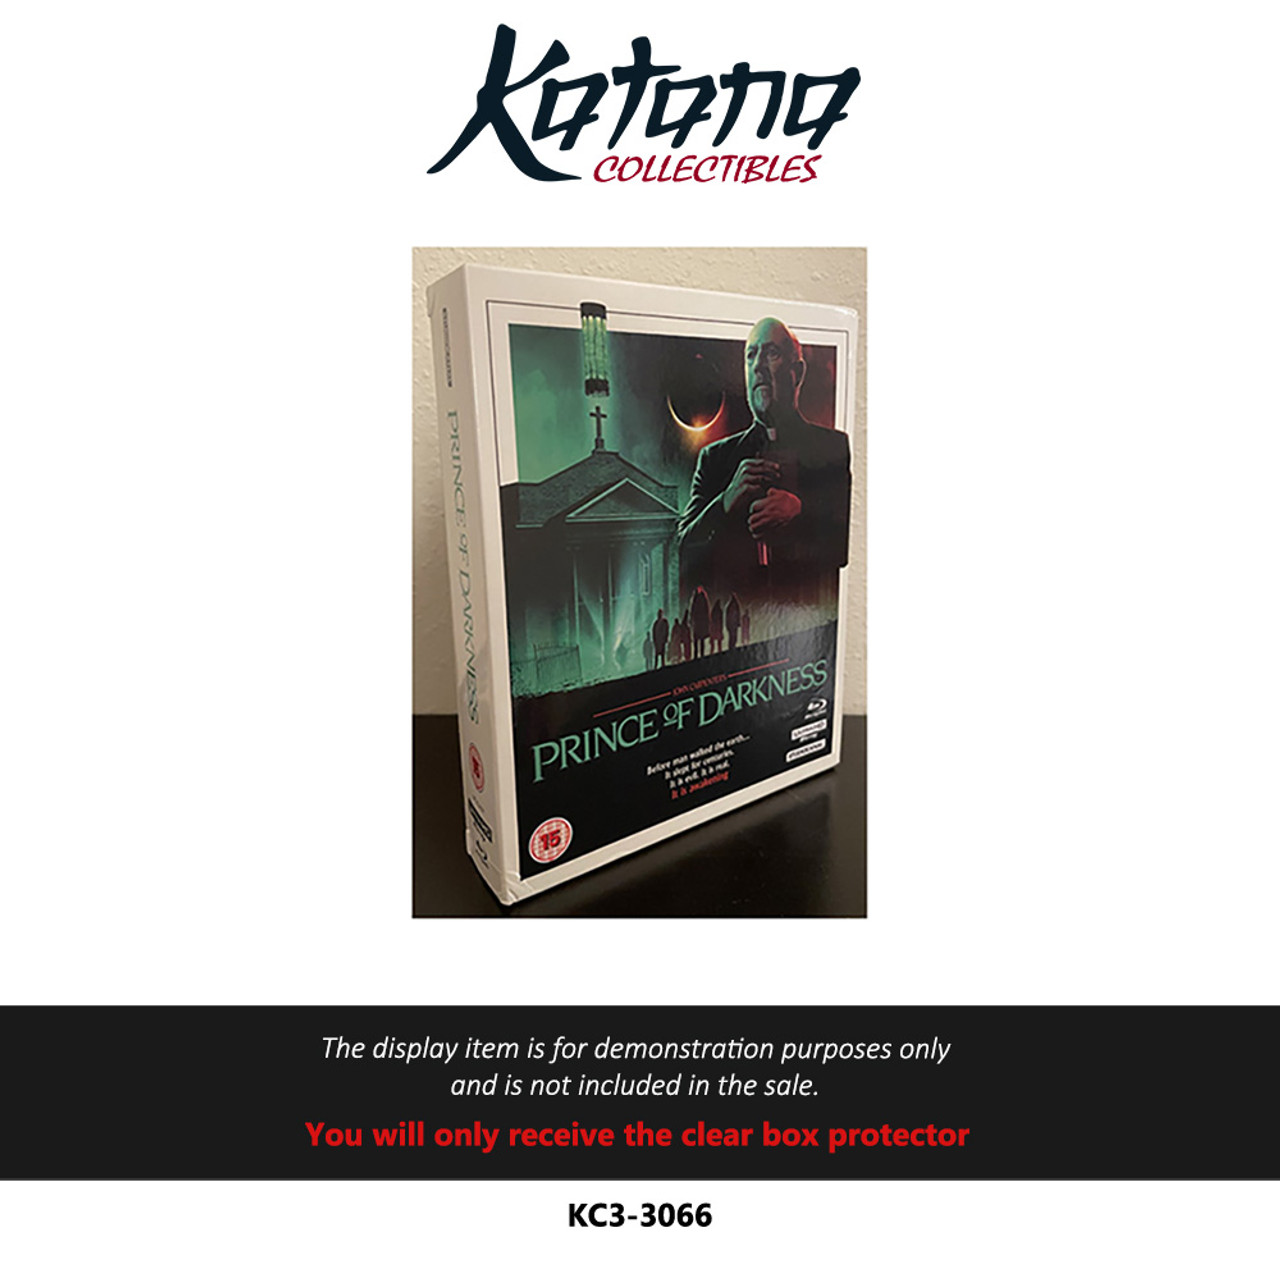 Katana Collectibles Protector For Prince of Darkness 4K Studio Canal 4 Disc Box Set